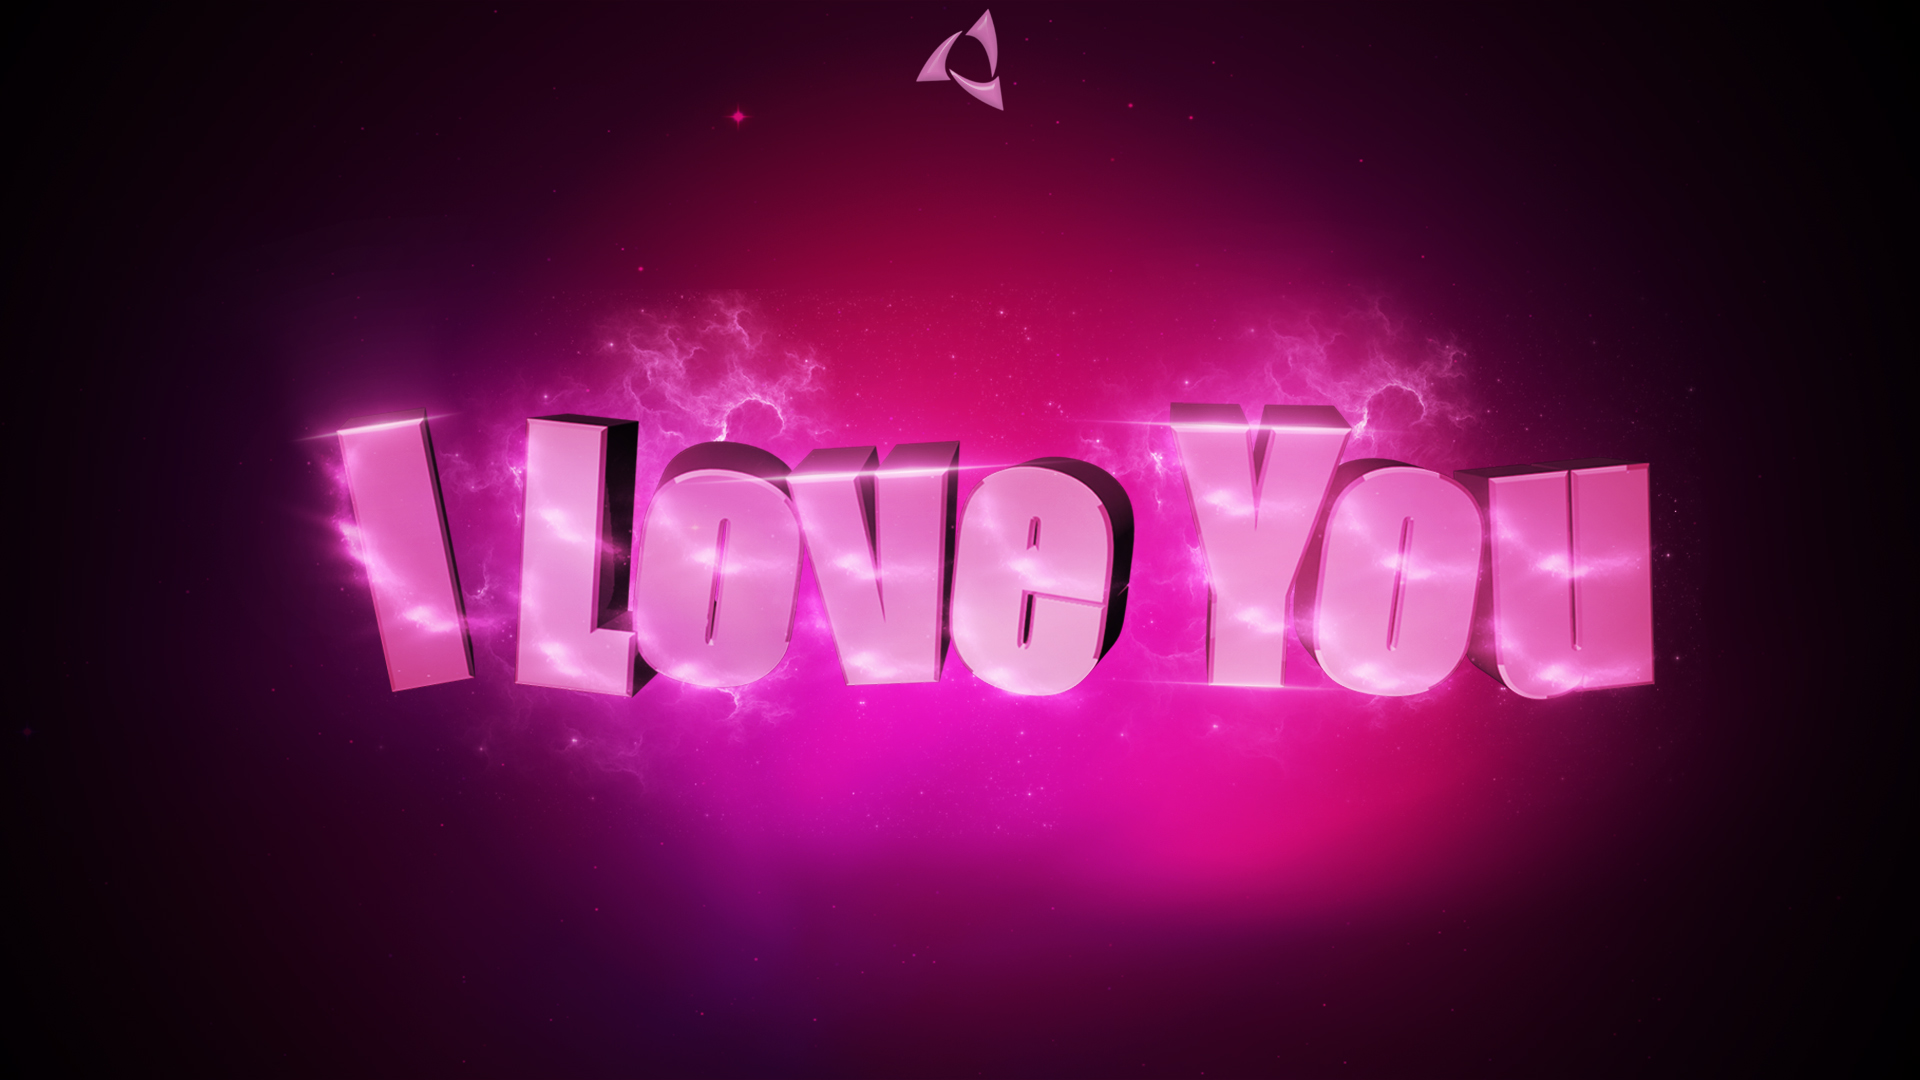 I Love You Wallpaper By SilencemakerHD